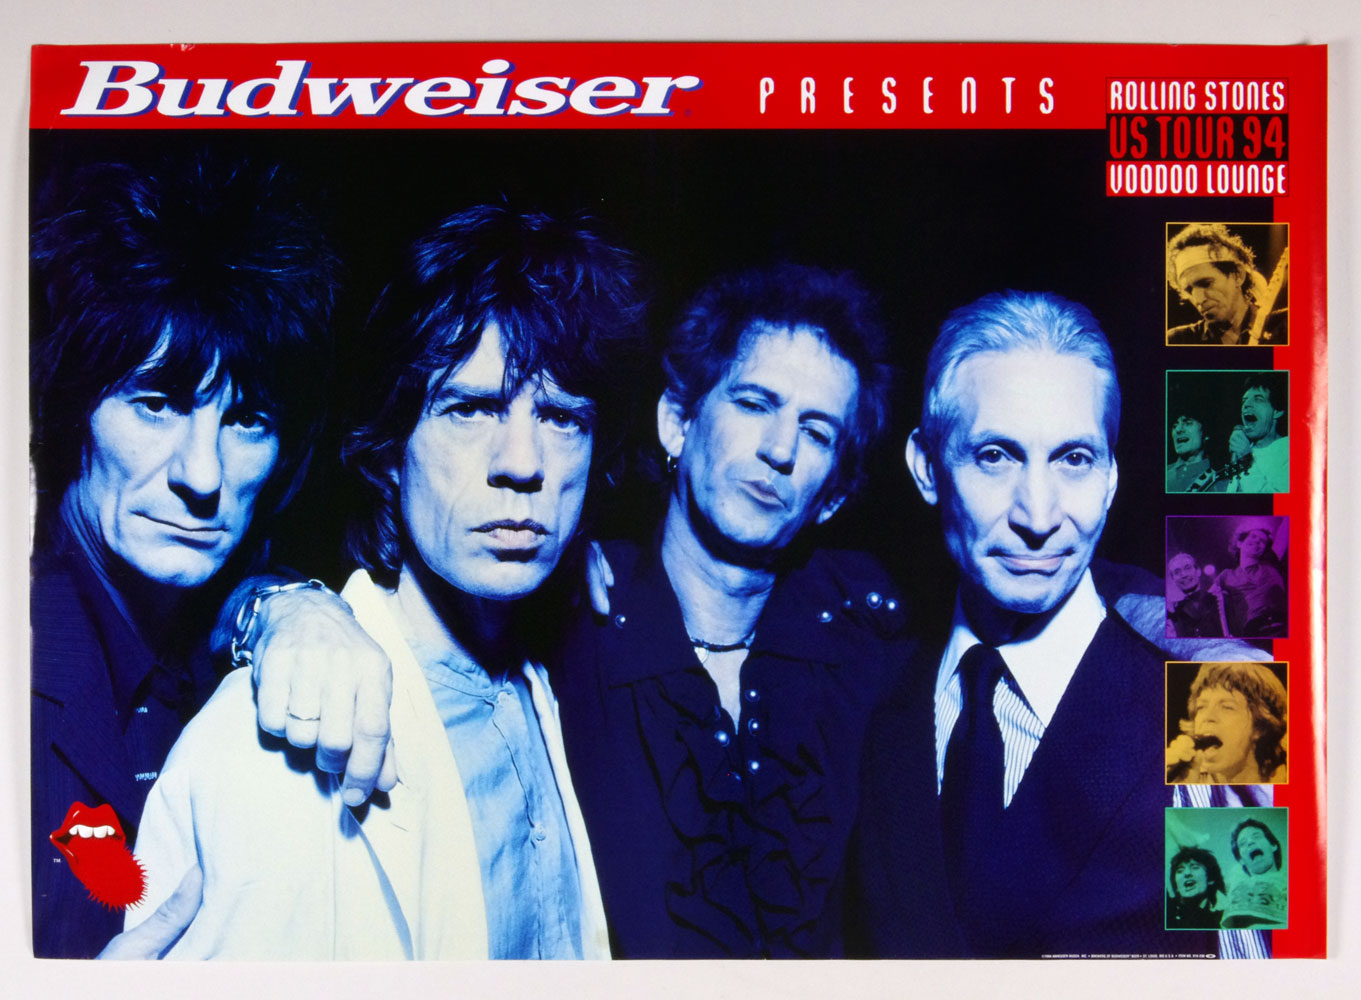 The Rolling Stones Poster 1994 Voodoo Lounge US Tour 33 x 22